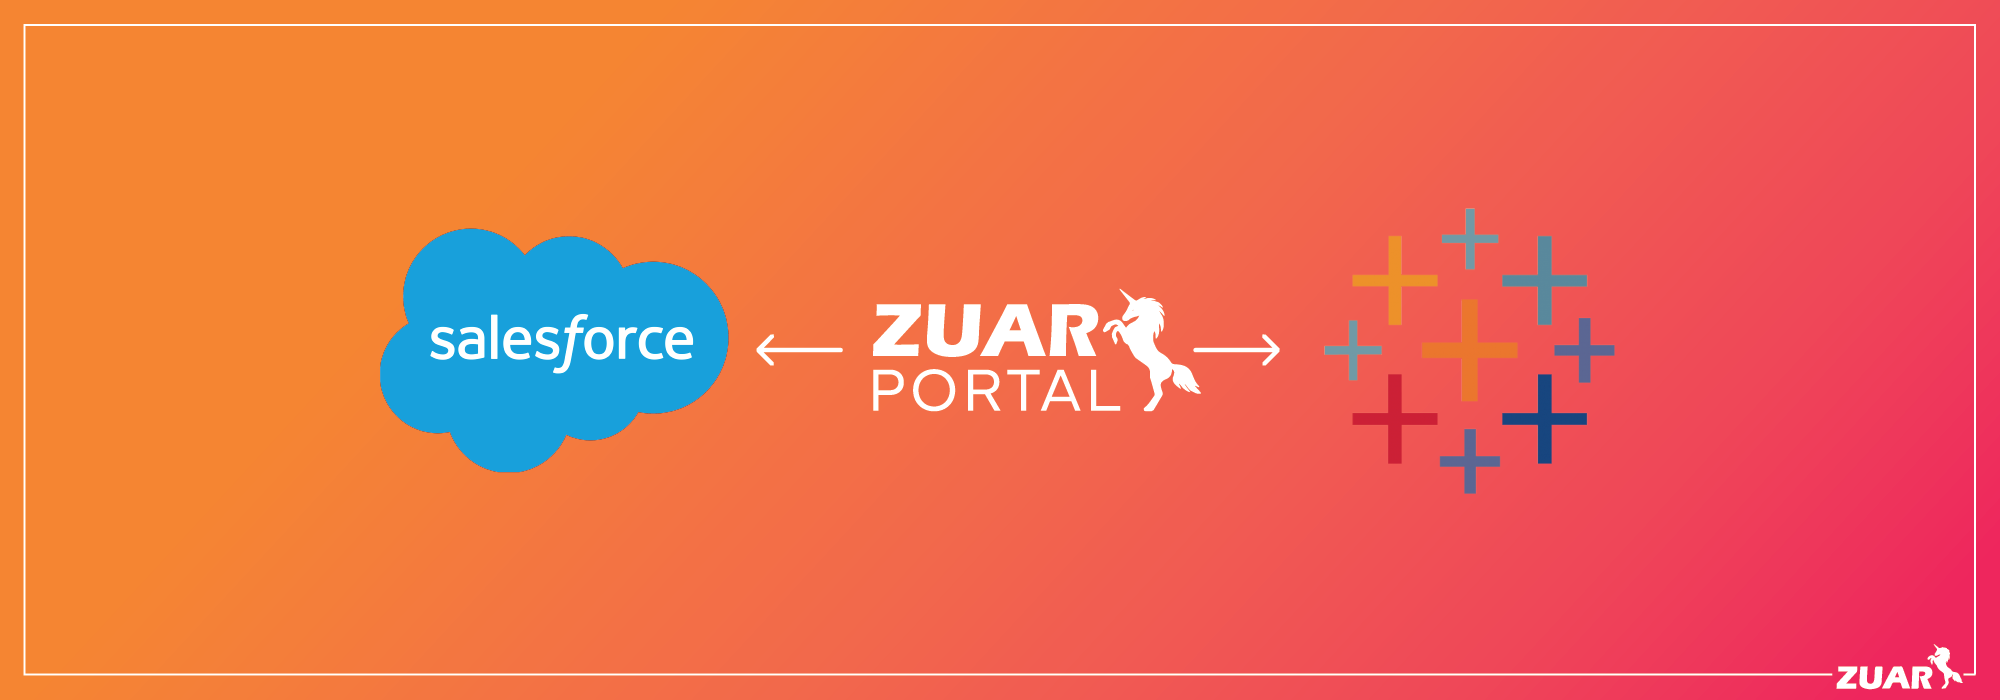 How to Embed Tableau Into Salesforce With Zuar Portal Utilizing Single Sign-On (SSO)